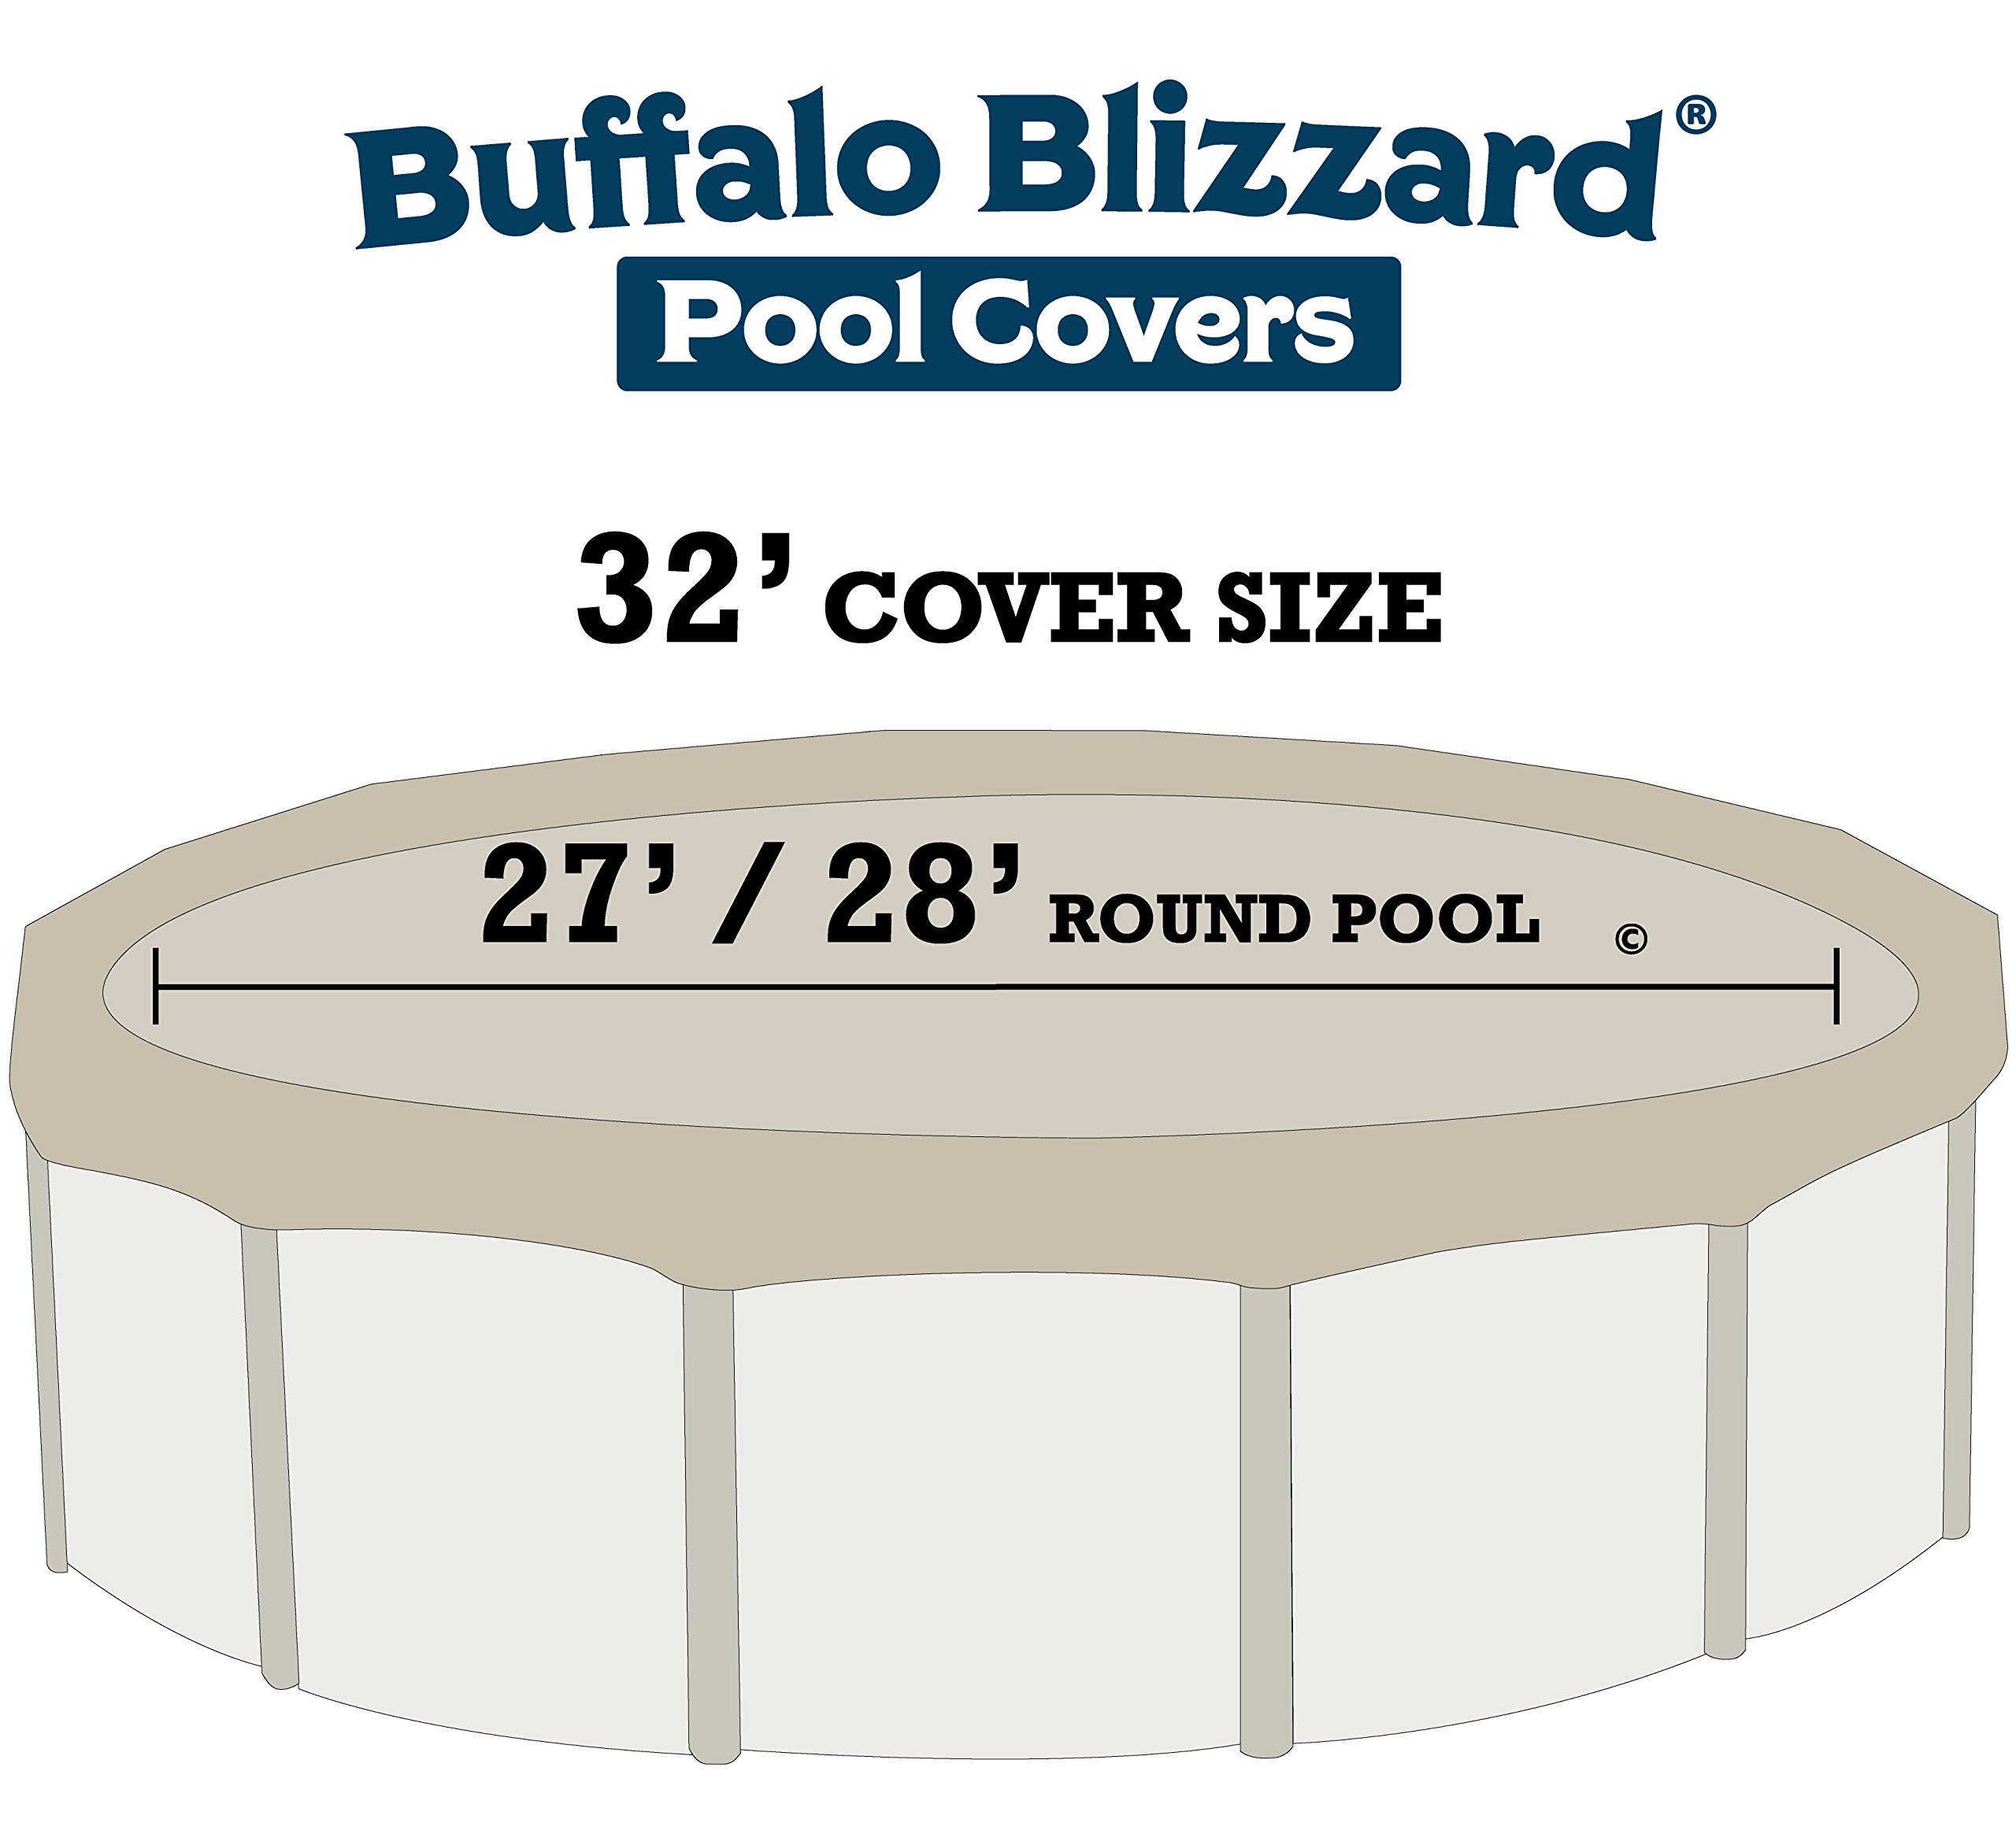 Buffalo Blizzard Supreme Plus Winter Cover for 28' Foot Round above-Ground Swimming Pools | Tan/Silver Reversible | All Covers Include 4' Feet of Overlap for Secure Installation to Measure 32' Feet